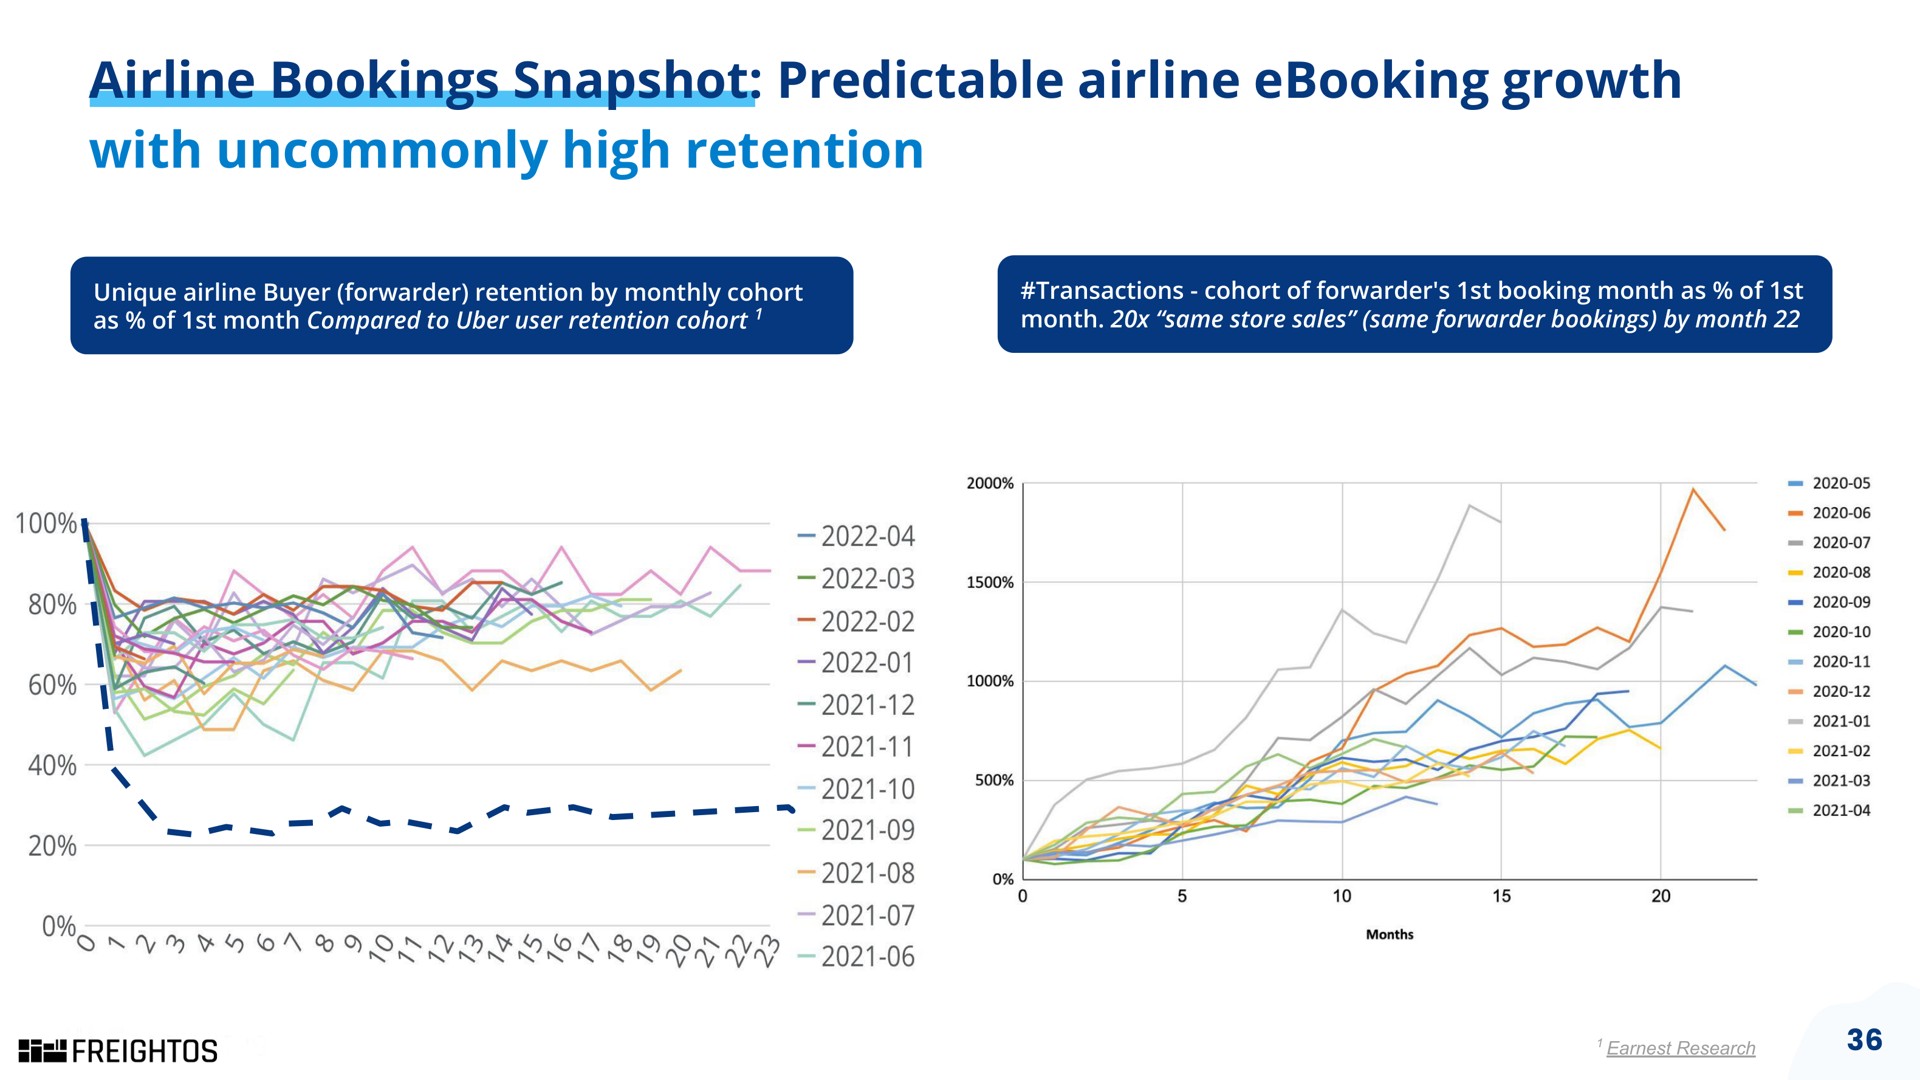 bookings snapshot predictable growth with uncommonly high retention | Freightos